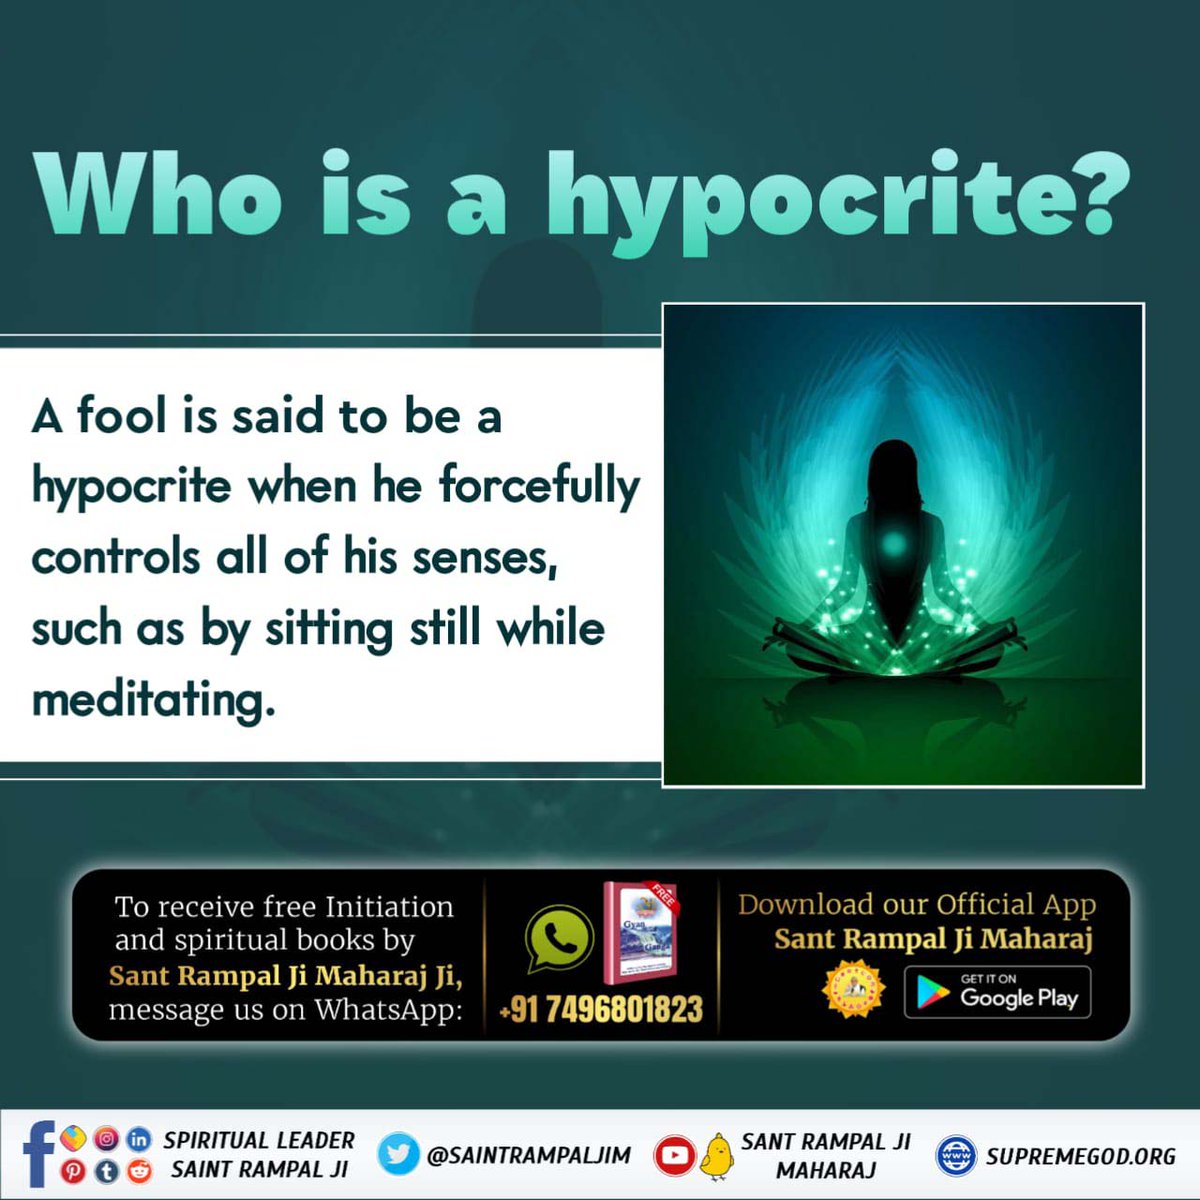 #What_Is_Meditation Meditation simply means controlling your senses through consistent practice. But the perfect sages describe such practice as giving temporary benefits which have nothing to do with salvation. Sant Rampal Ji Maharaj